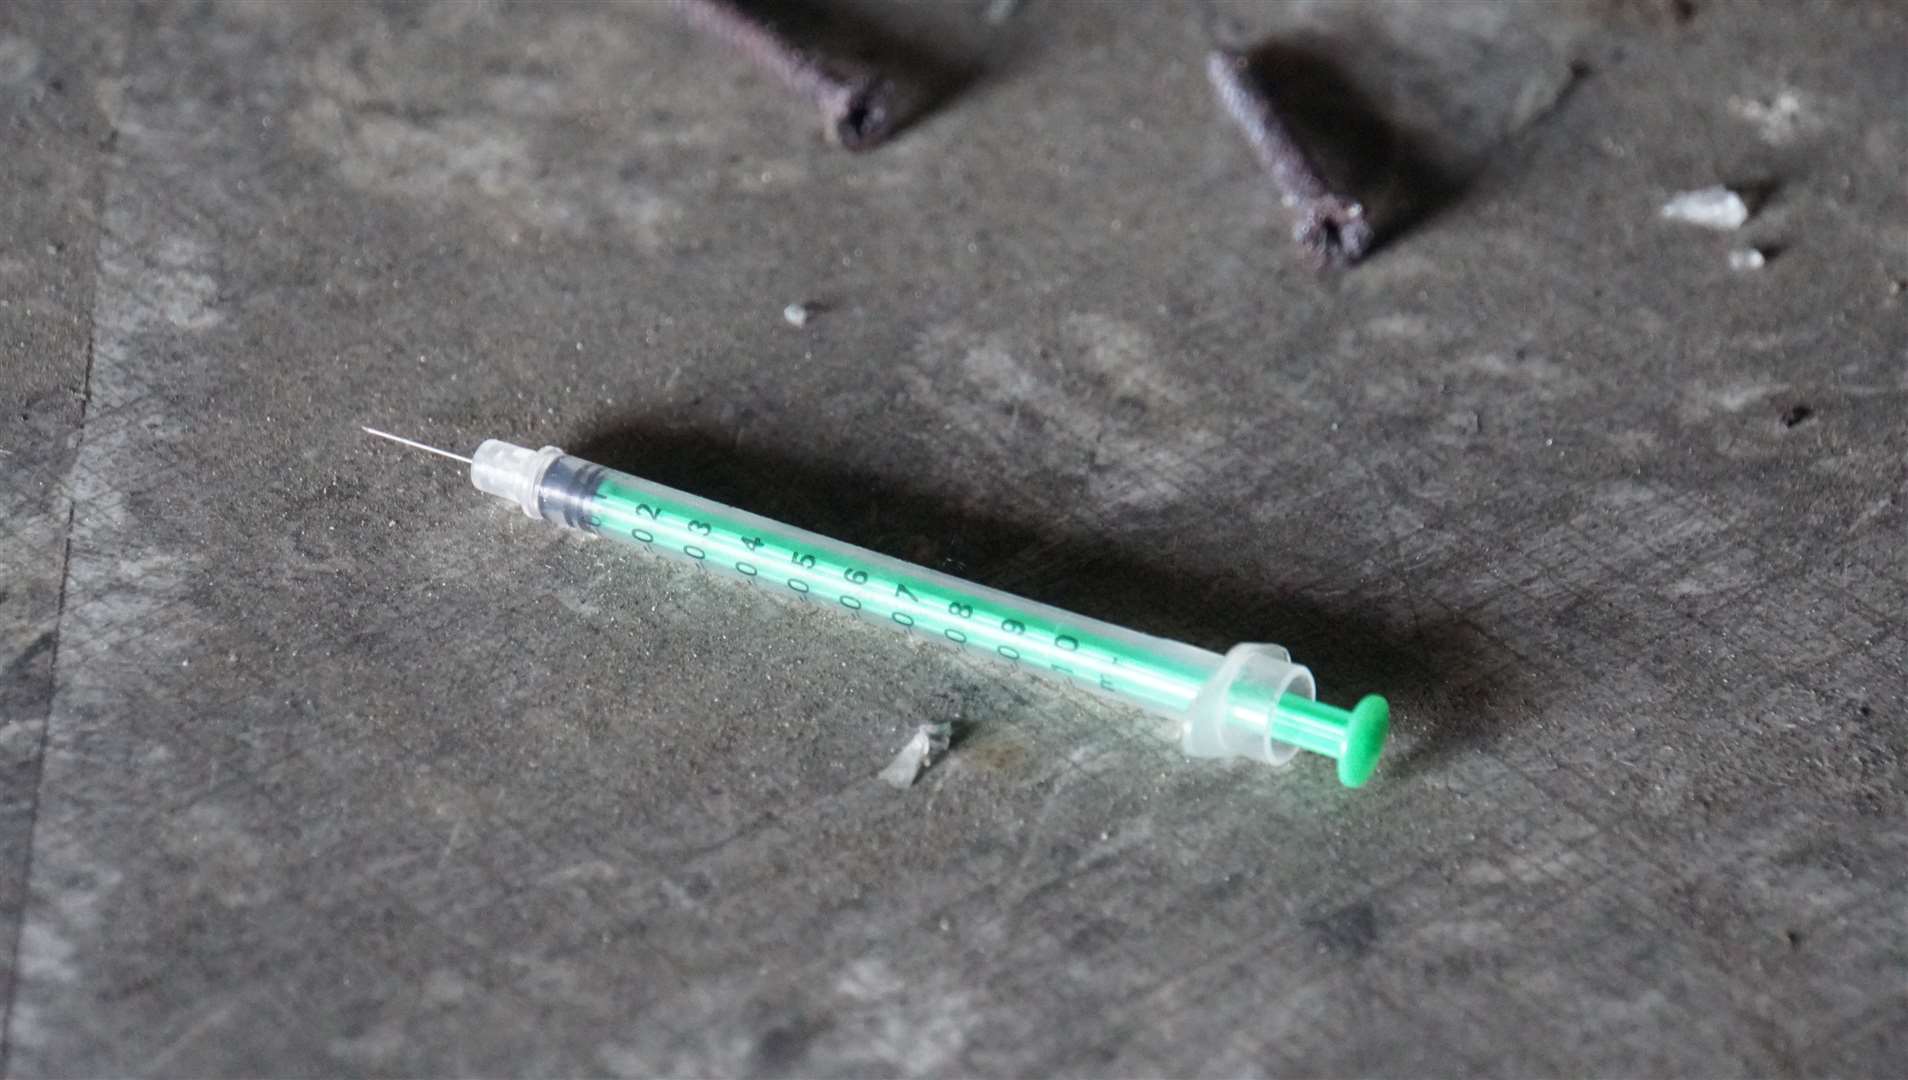 An open syringe that may have been used for injecting heroin found lying in an abandoned house in Wick. Picture: DGS